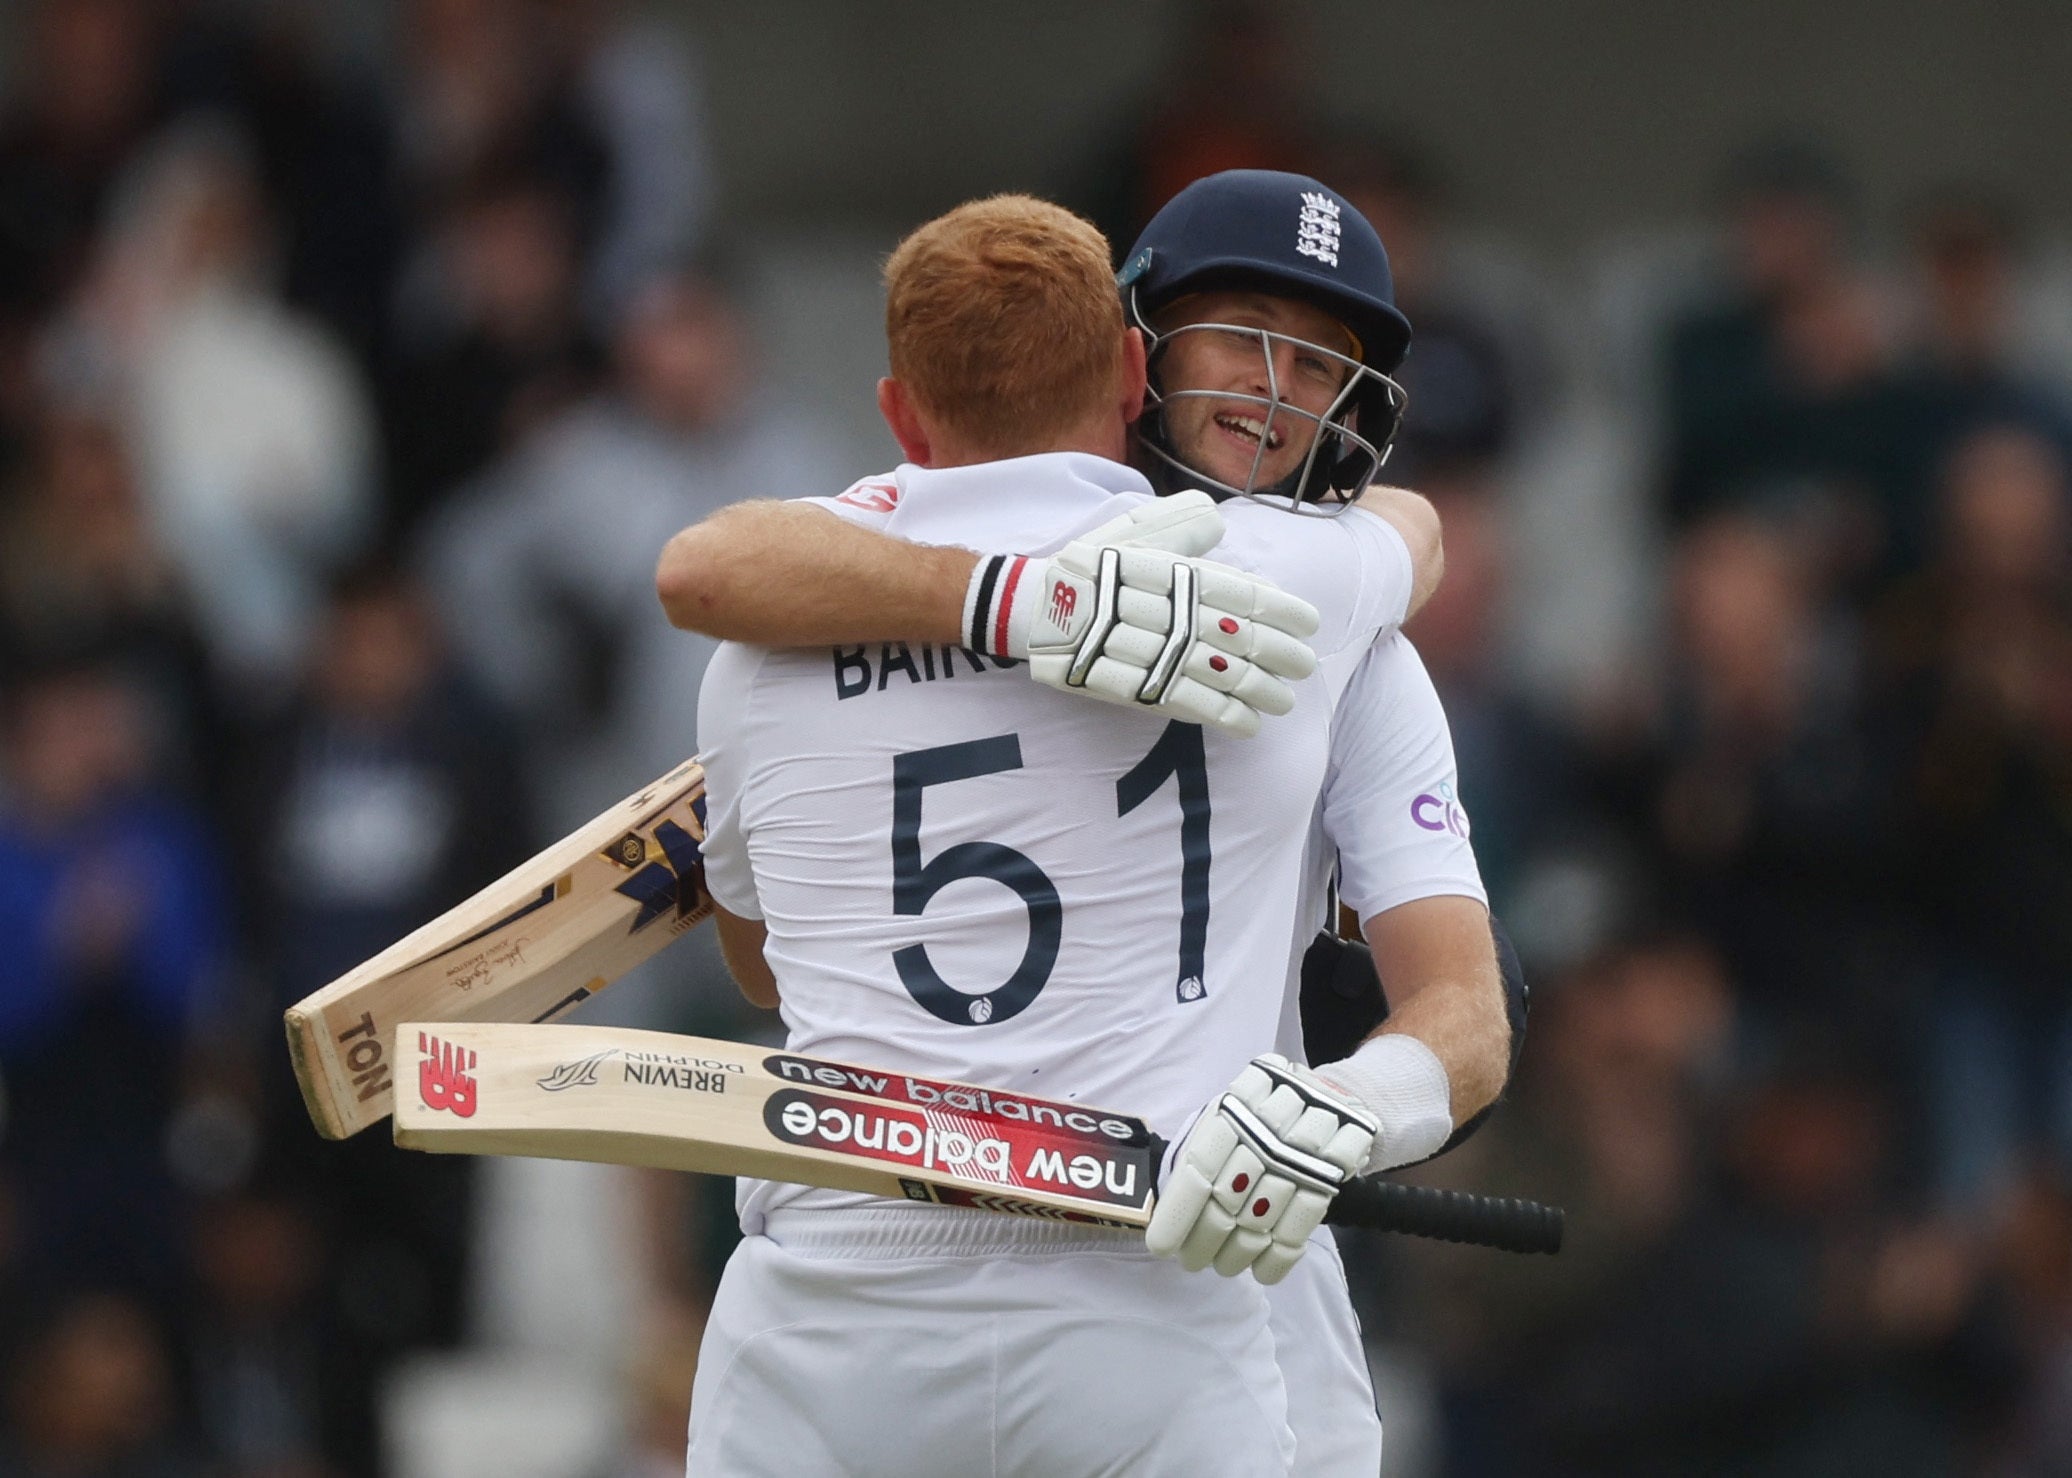 Root and Bairstow guided England to another famous win